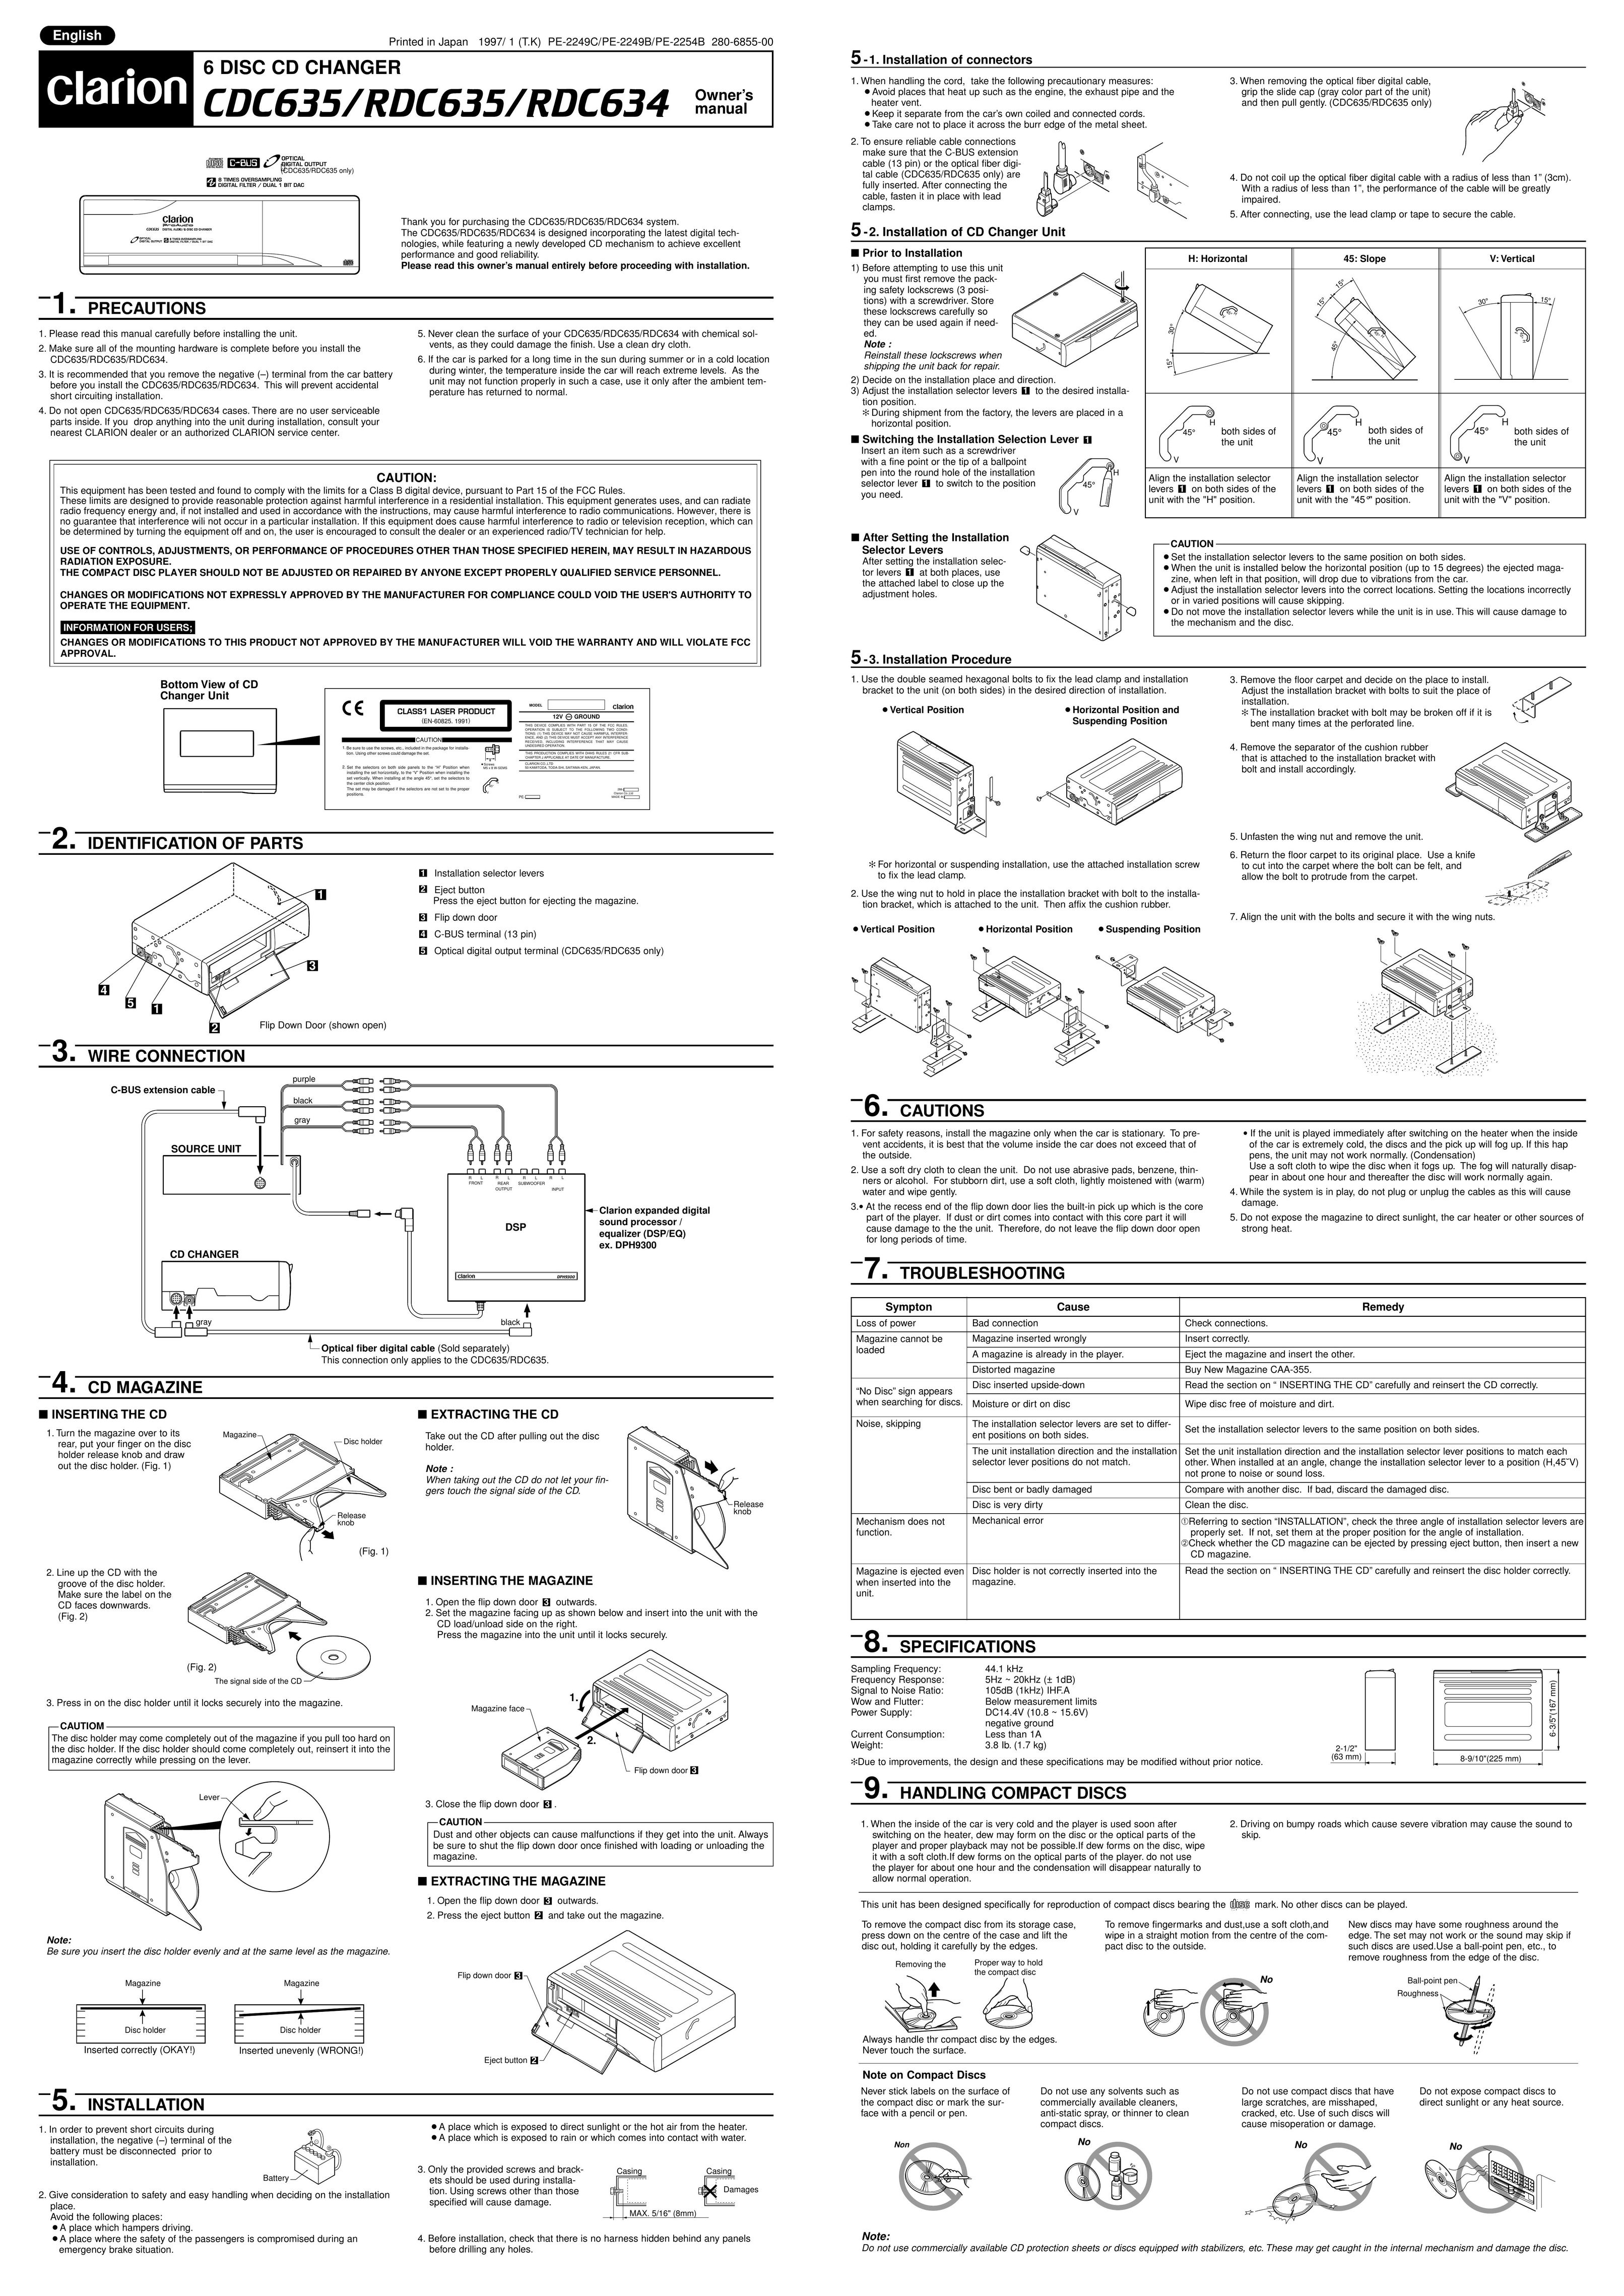 Clarion CDC635 Car Stereo System User Manual